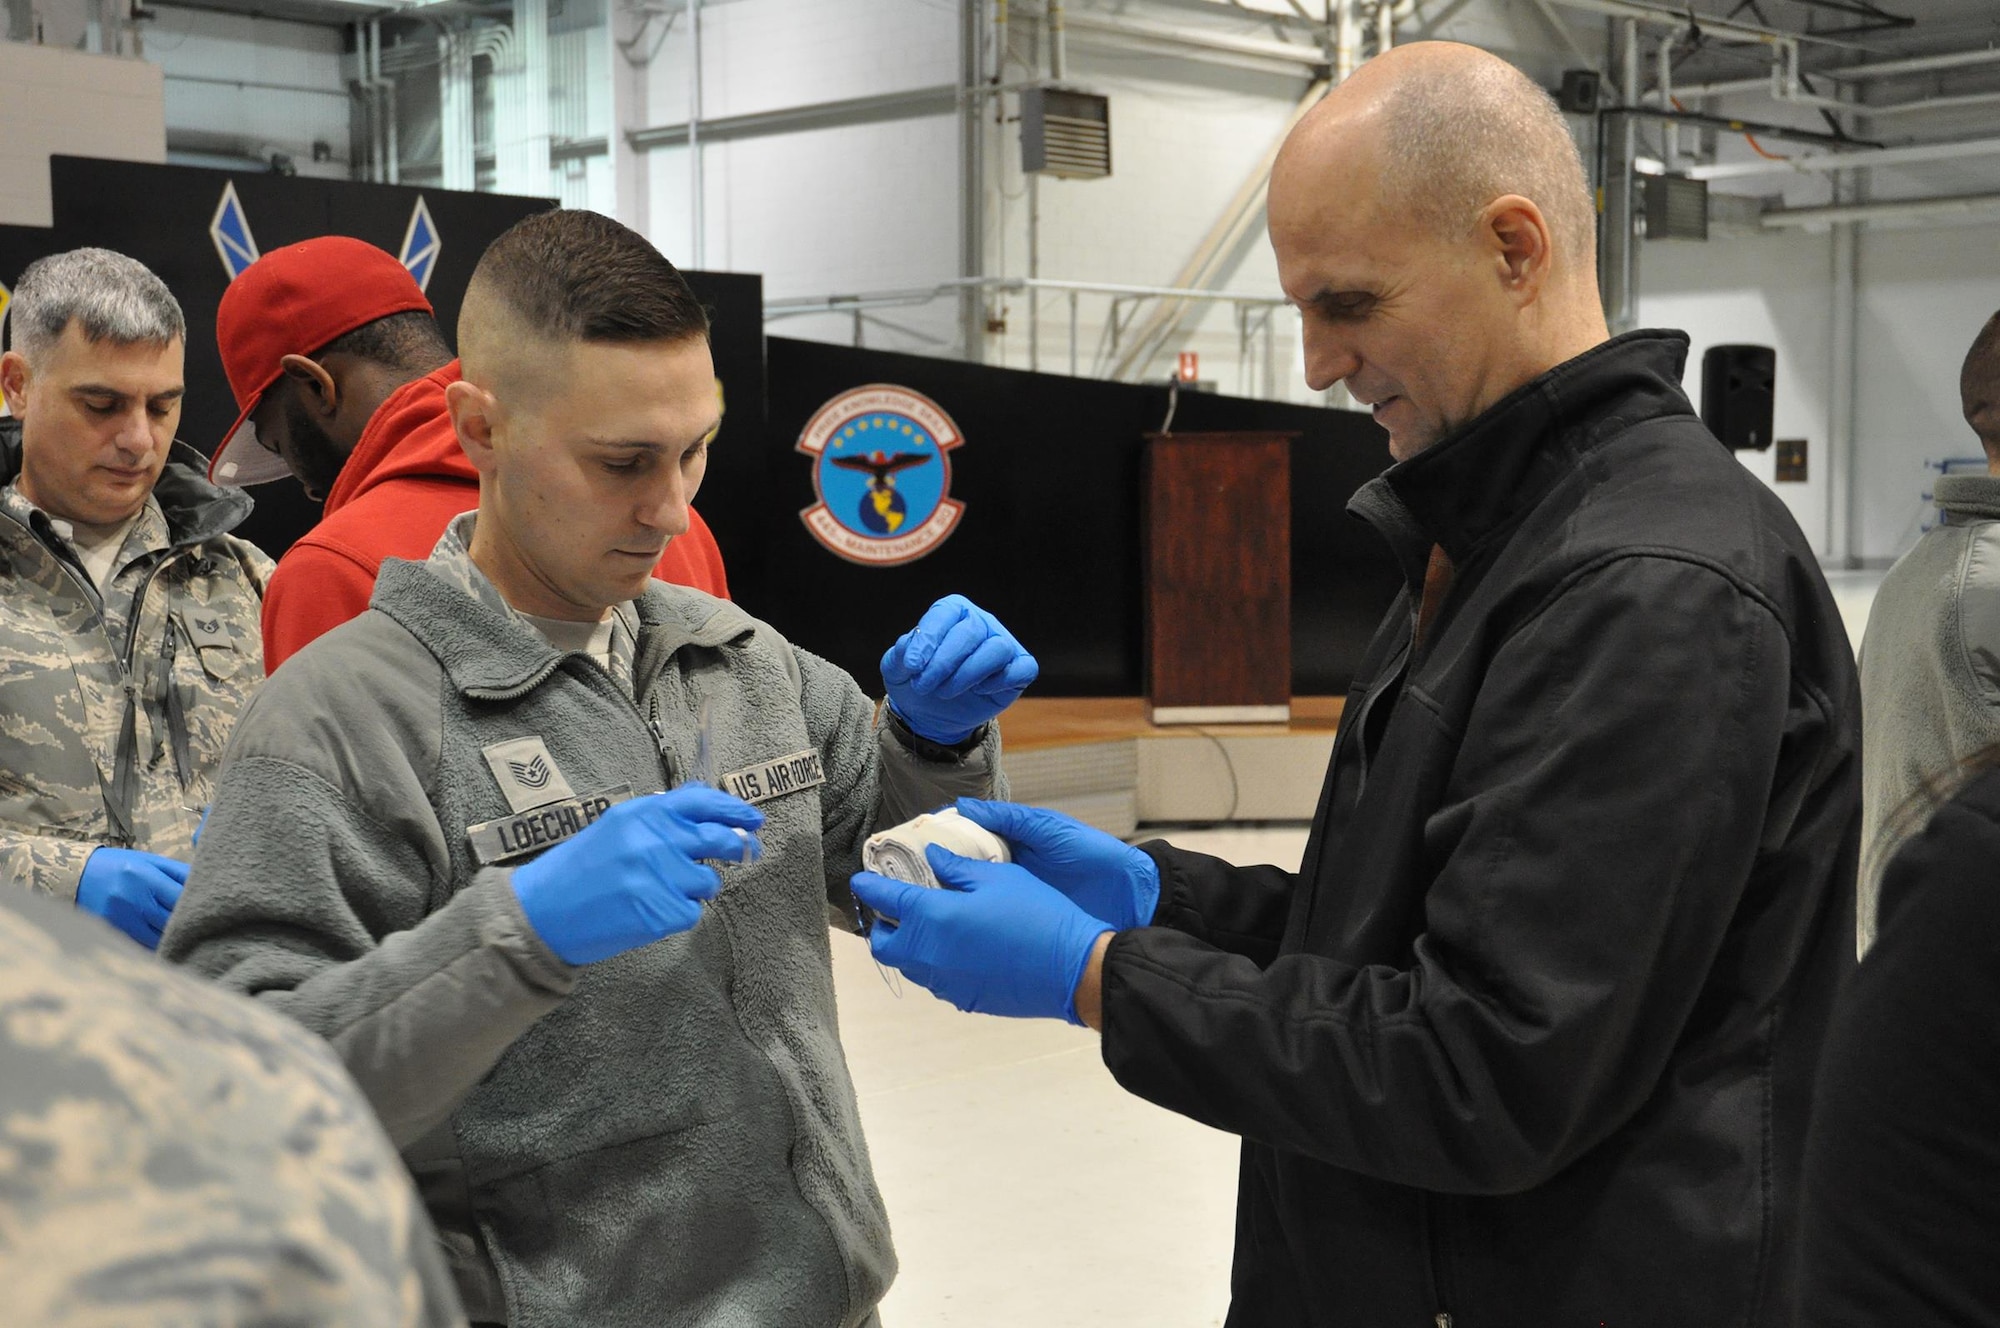 Tech. Sgt. Zachary Loechler, 87th Aerial Port Squadron air transportation craftsman, and his employer, Gerald Johnson, claims litigation manager for Safe Auto Insurance Company, practice suturing during a demonstration provided by the 445th Aerospace Medicine Squadron as part of the 445th Airlift Wing Employers Day Nov. 5, 2016. Approximately 70 employers and 35 reservists enjoyed breakfast and lunch, received a wing mission briefing, received a C-17 Globemaster III flight, participated in tours and demonstrations of the different jobs and training that their Air Force Reserve employees do when performing military service. The employers also received information about the Employer Support of the Guard and Reserve program. (U.S. Air Force photo/Staff Sgt. Rachel Ingram)